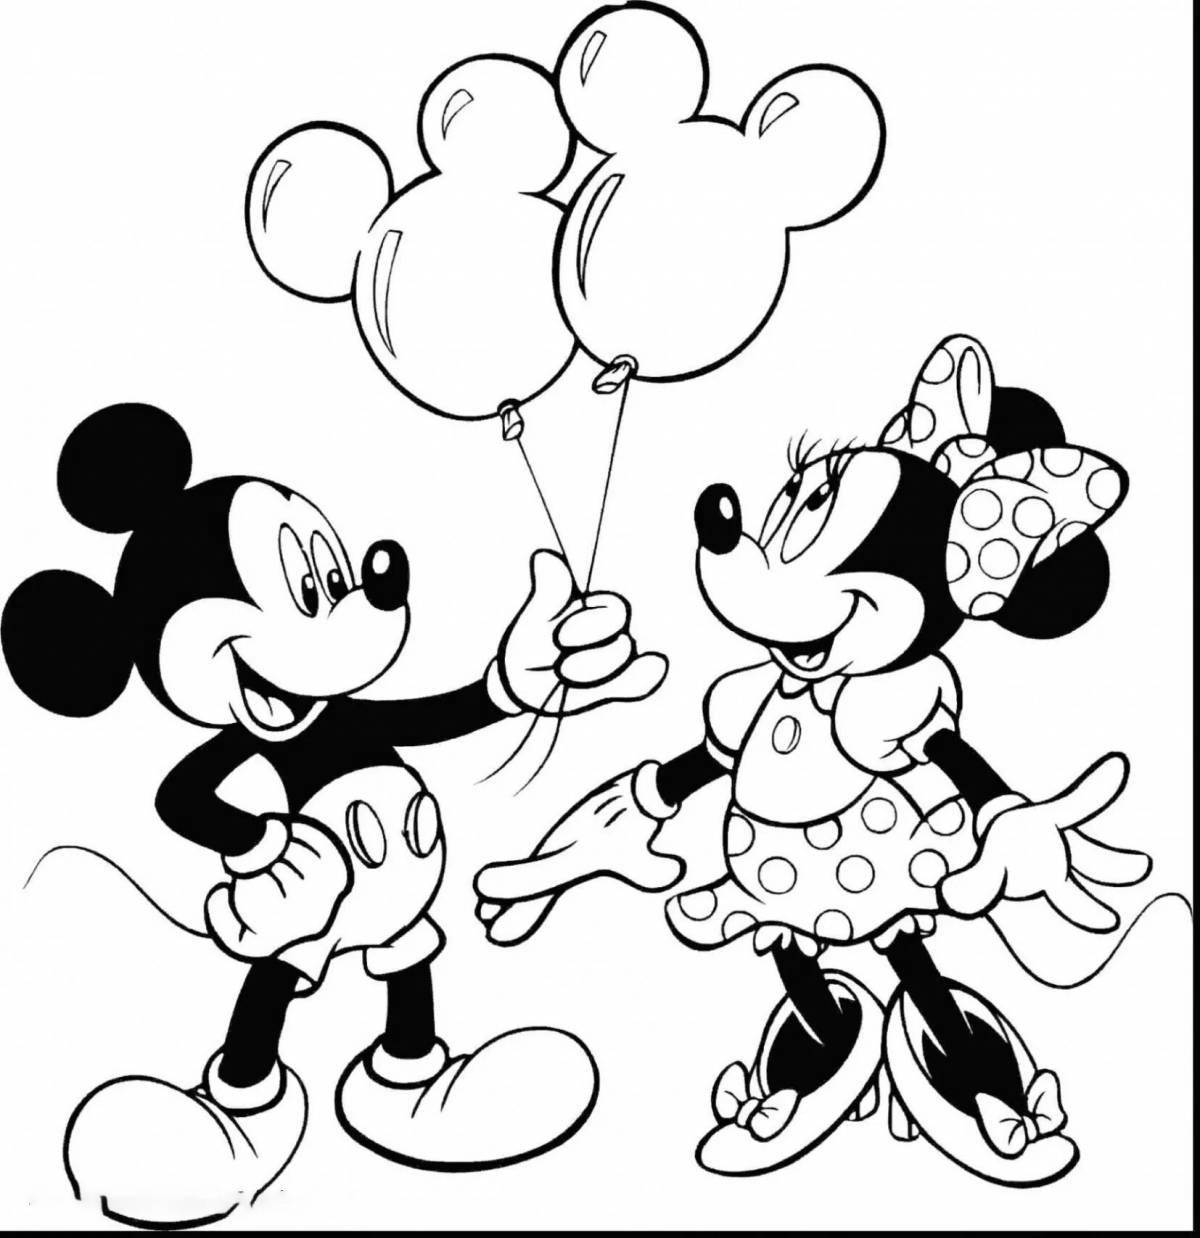 Sweet mickey mouse coloring book